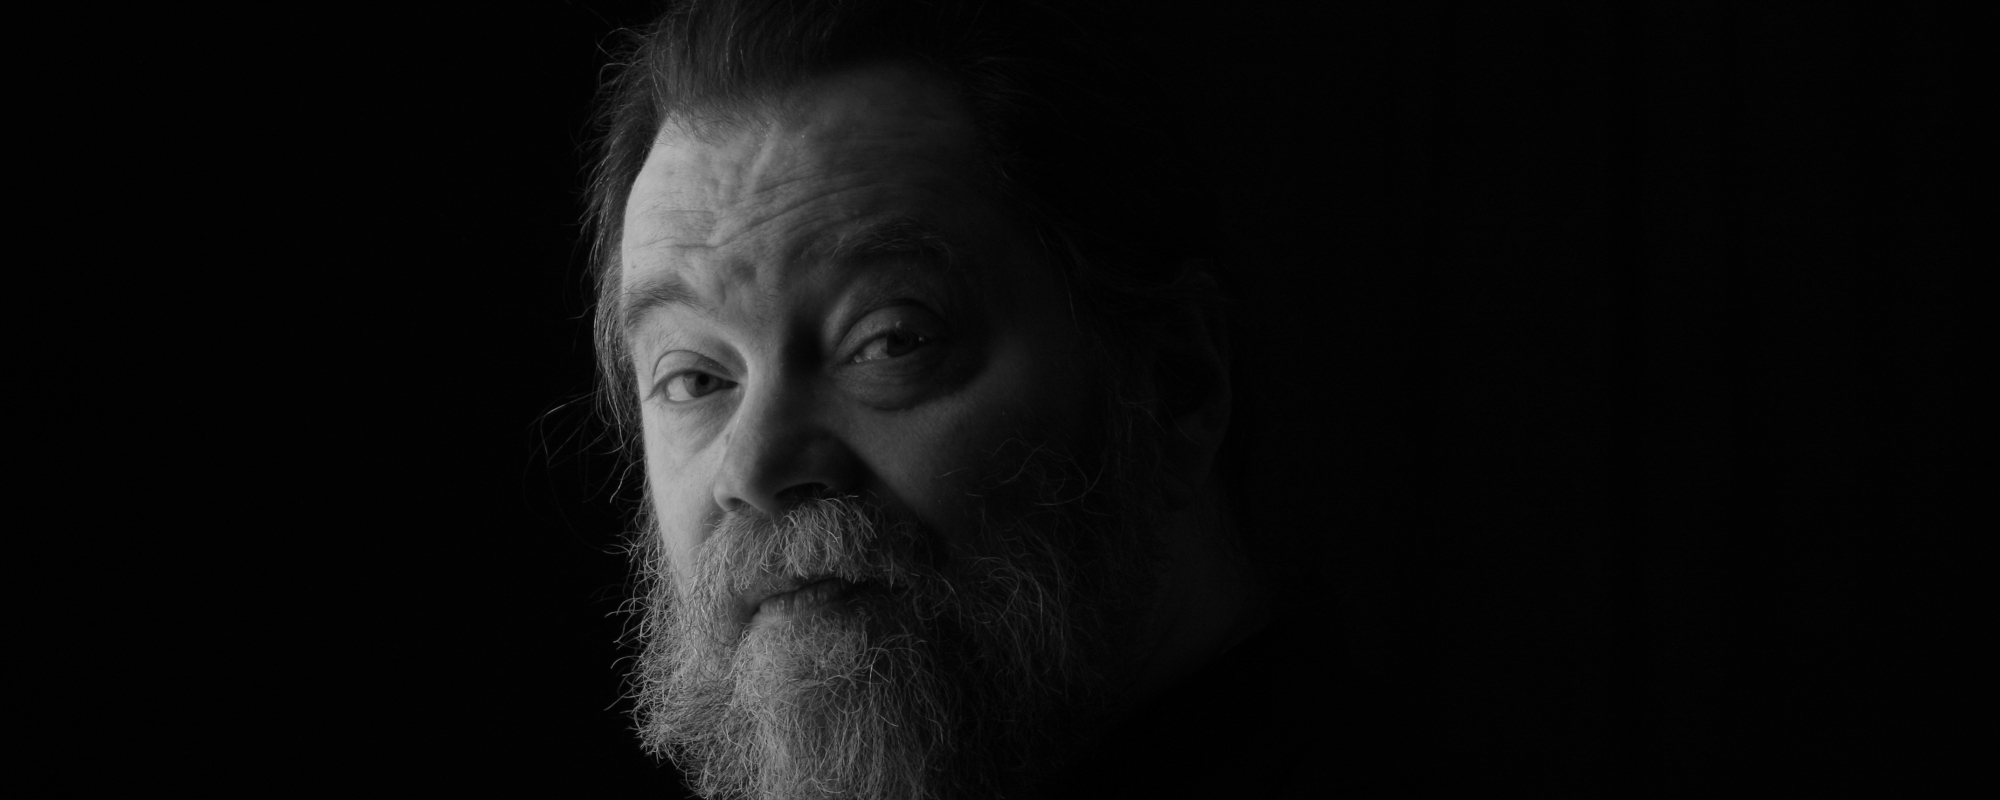 Review: Roky Erickson’s Songs Get Elevated On A Belated, Heartfelt Follow-Up To 1990’s ‘Where The Pyramid Meets The Eye’